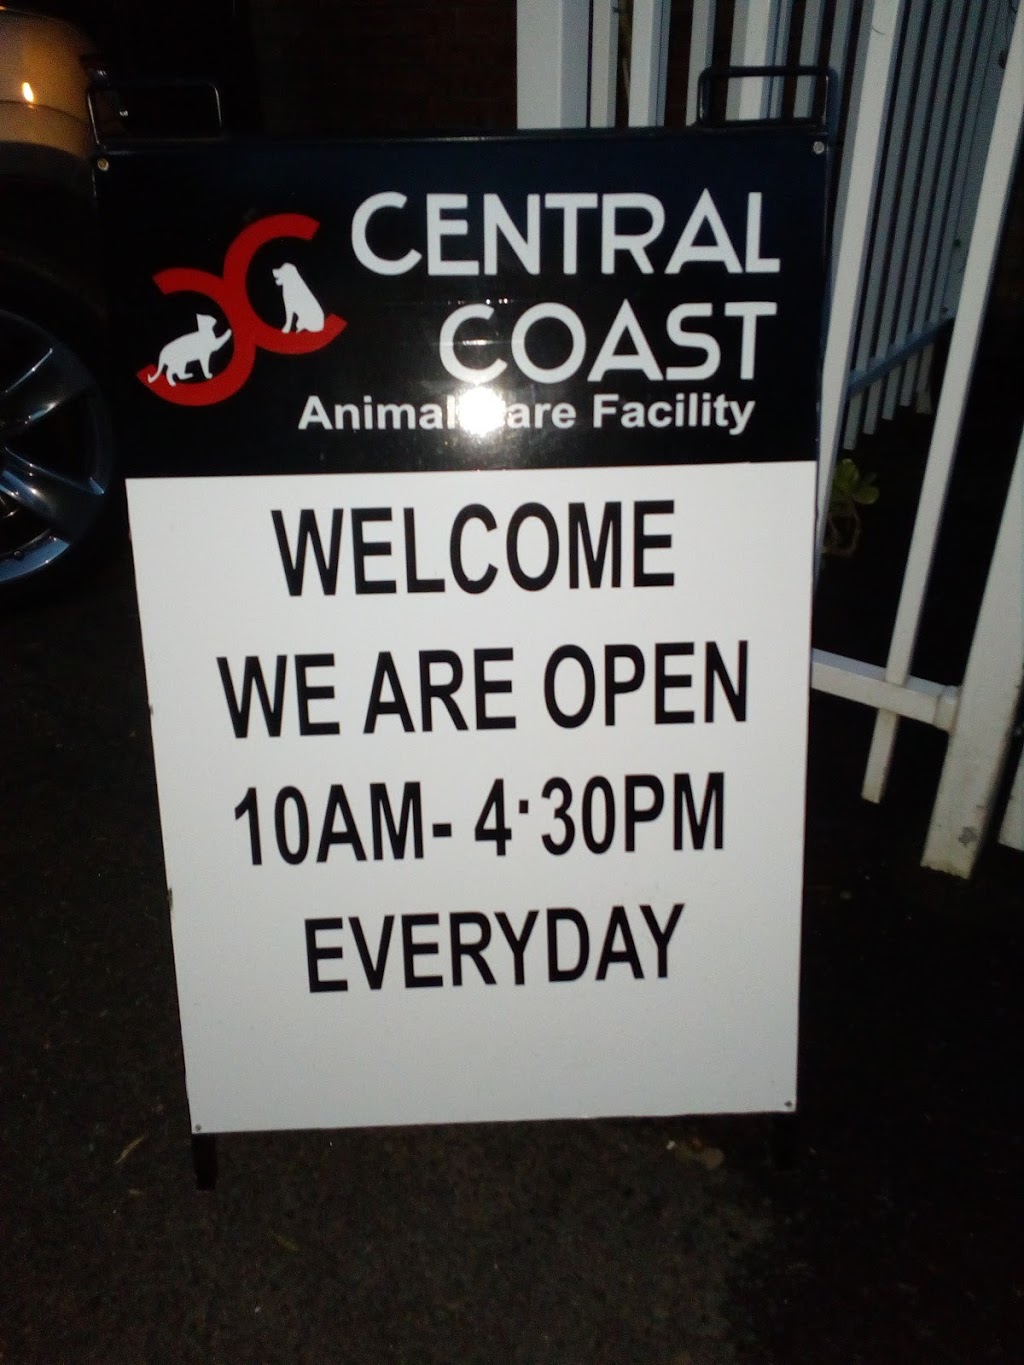 The Sign Writer | store | 14 Casino St, Terrigal NSW 2260, Australia | 0451953476 OR +61 451 953 476